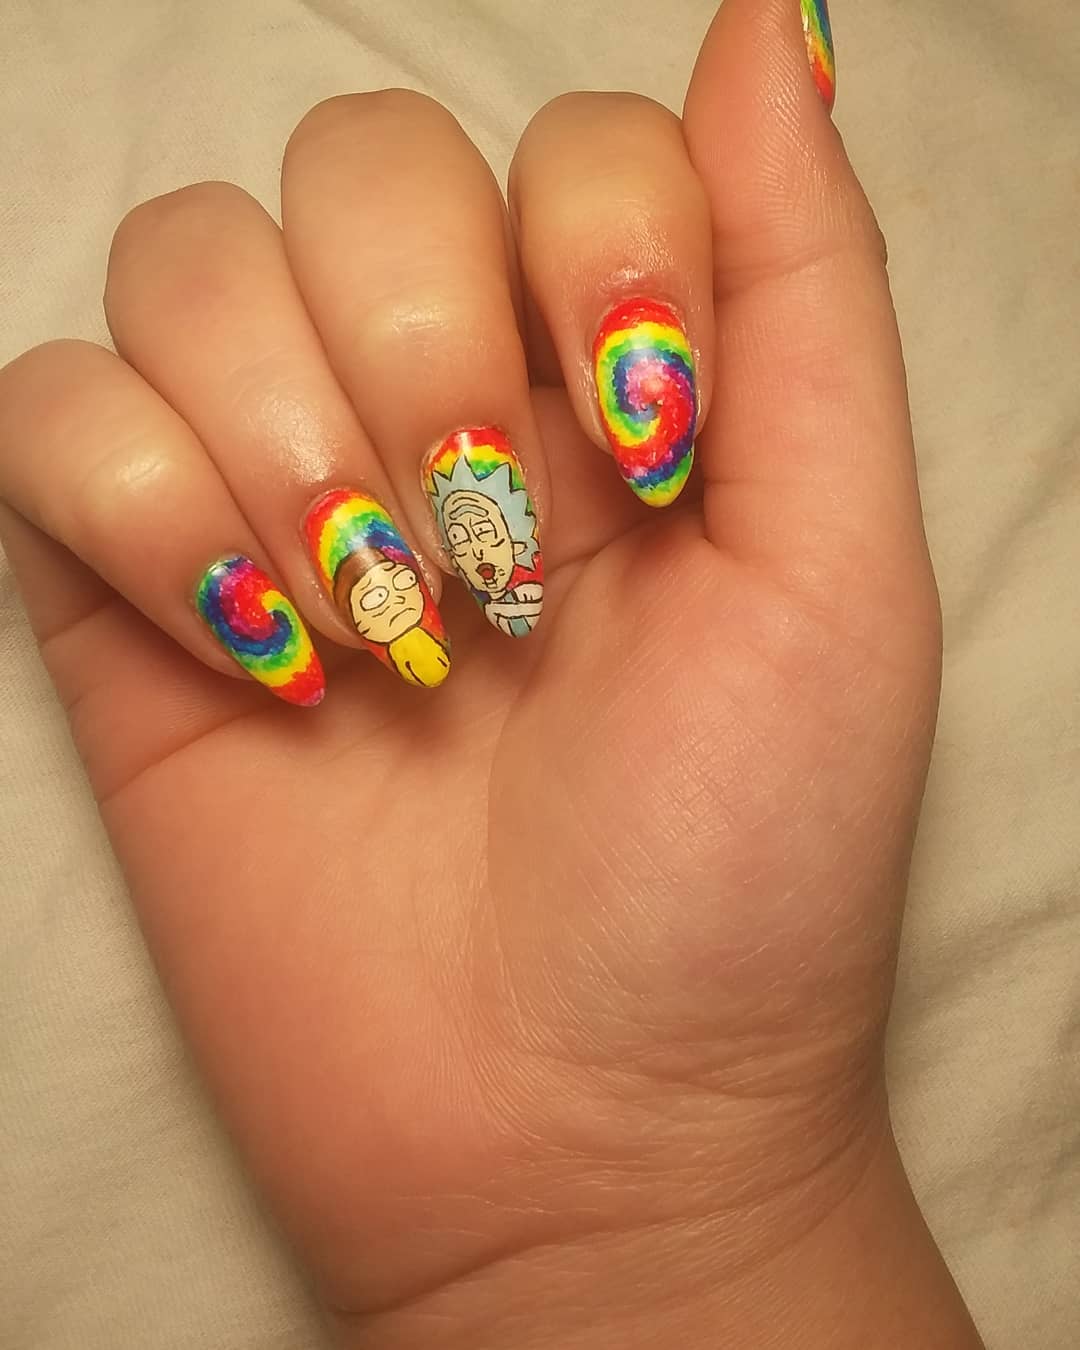 Amazing Pointed Nail Design to Have and Cherish - Cartoon Designs